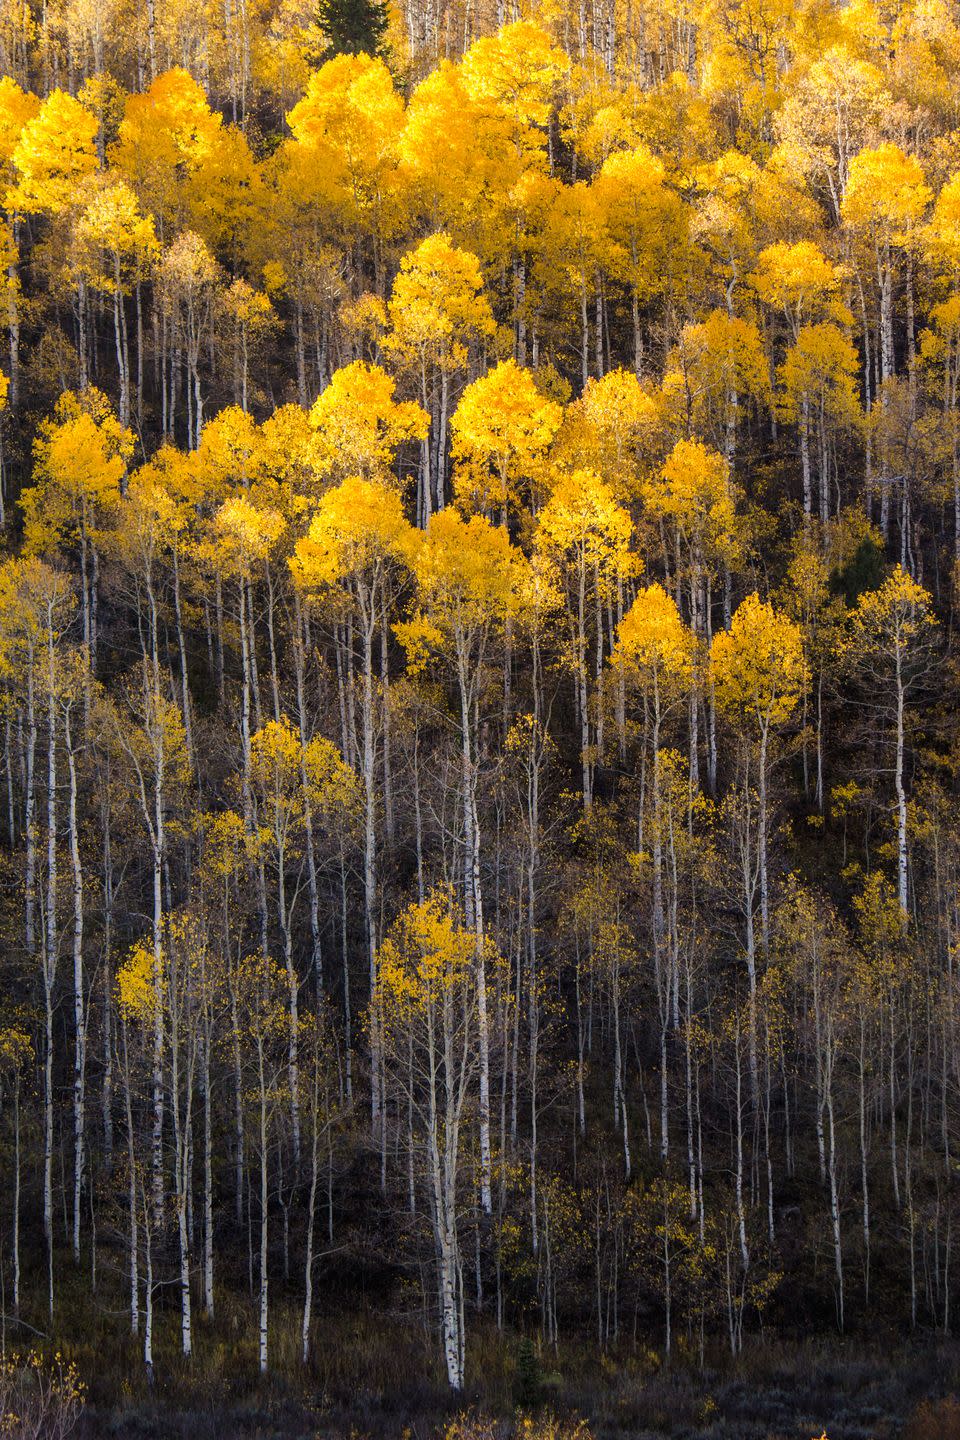 The largest known living organism is an aspen grove.